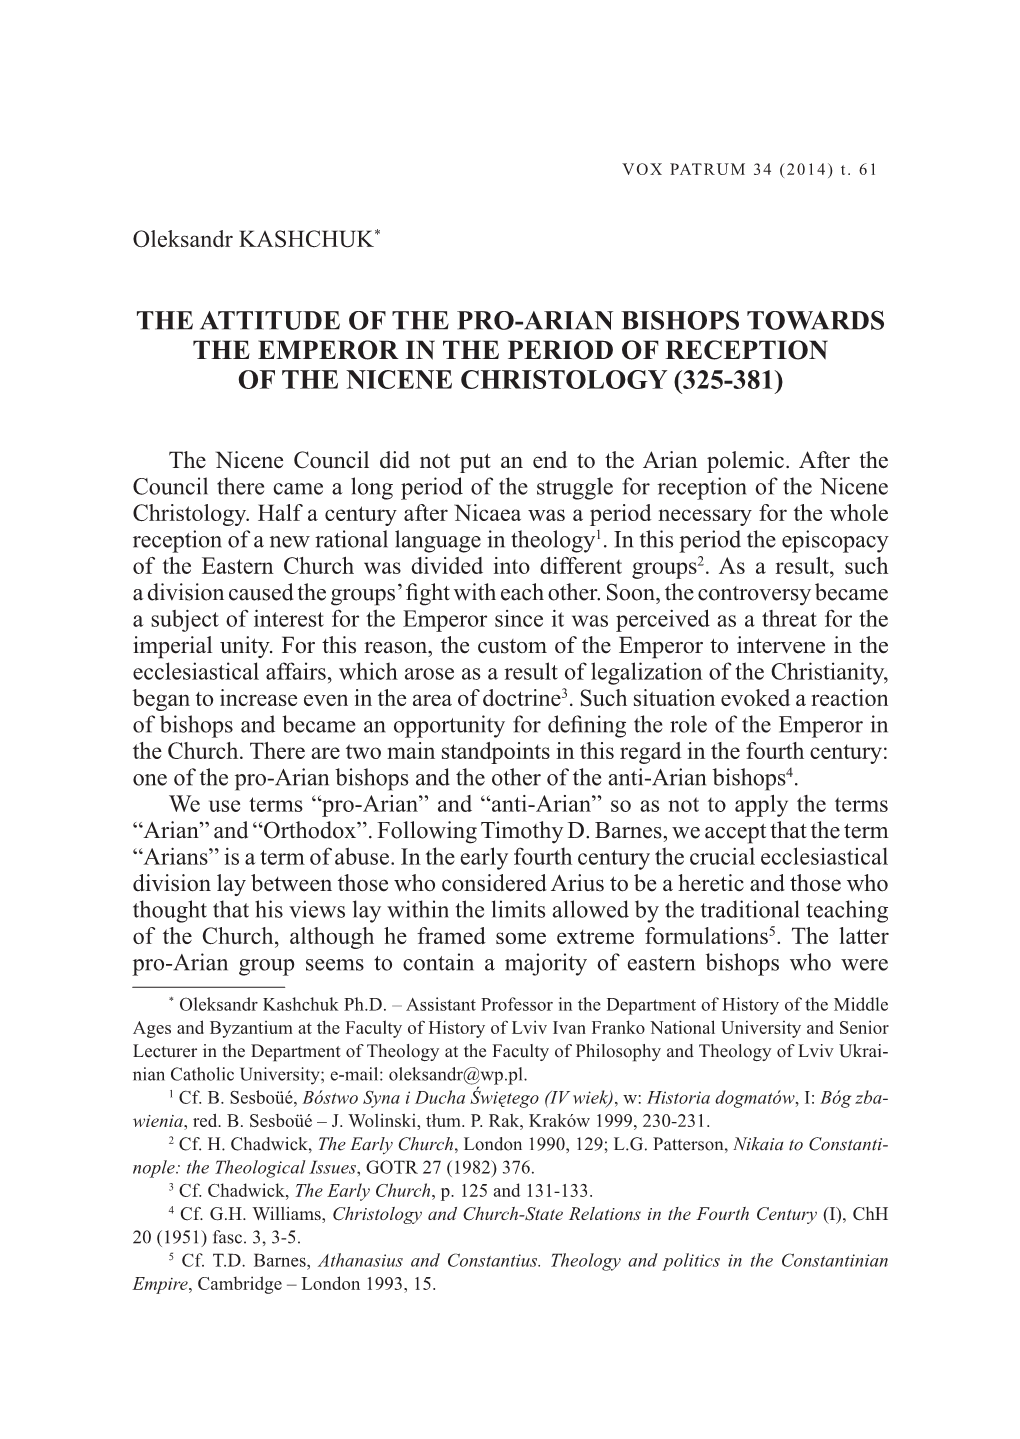 The Attitude of the Pro-Arian Bishops Towards the Emperor in the Period of Reception of the Nicene Christology (325-381)